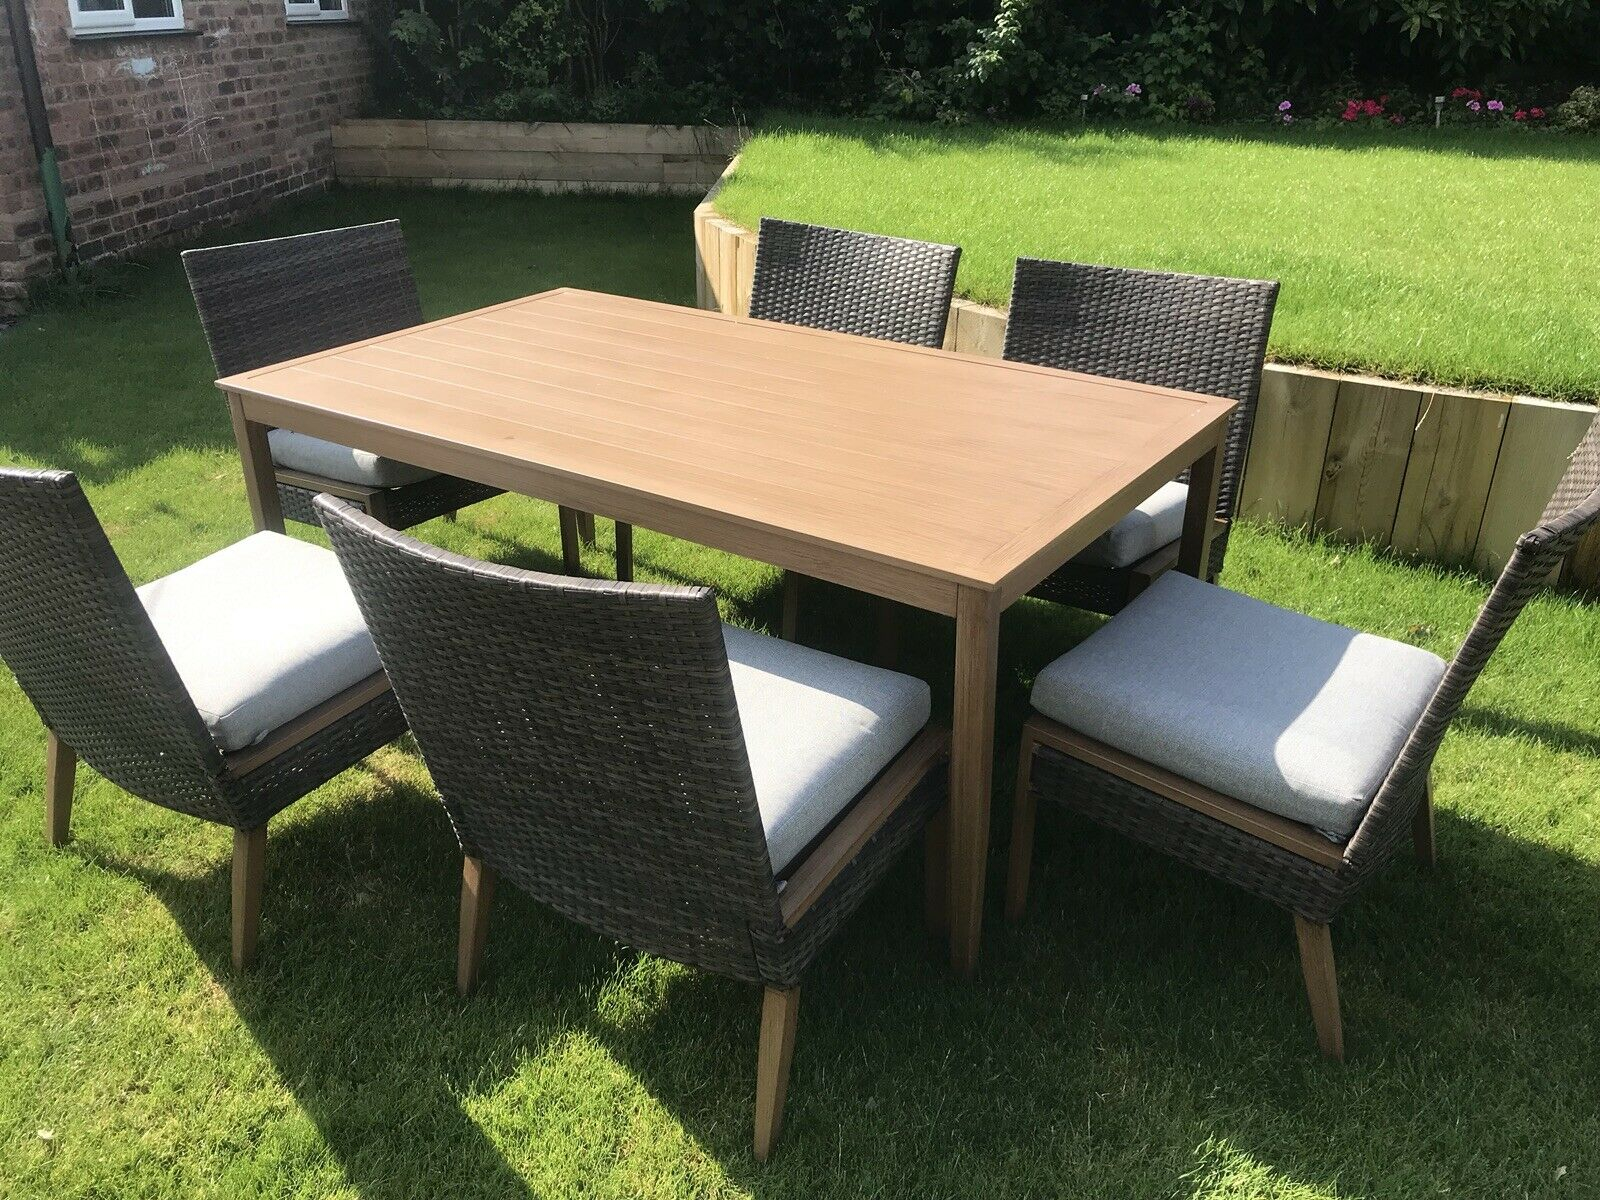 6 Seater Patio Dining Set Outdoor Garden Furniture Table And Chairs With Cushion throughout proportions 1600 X 1200